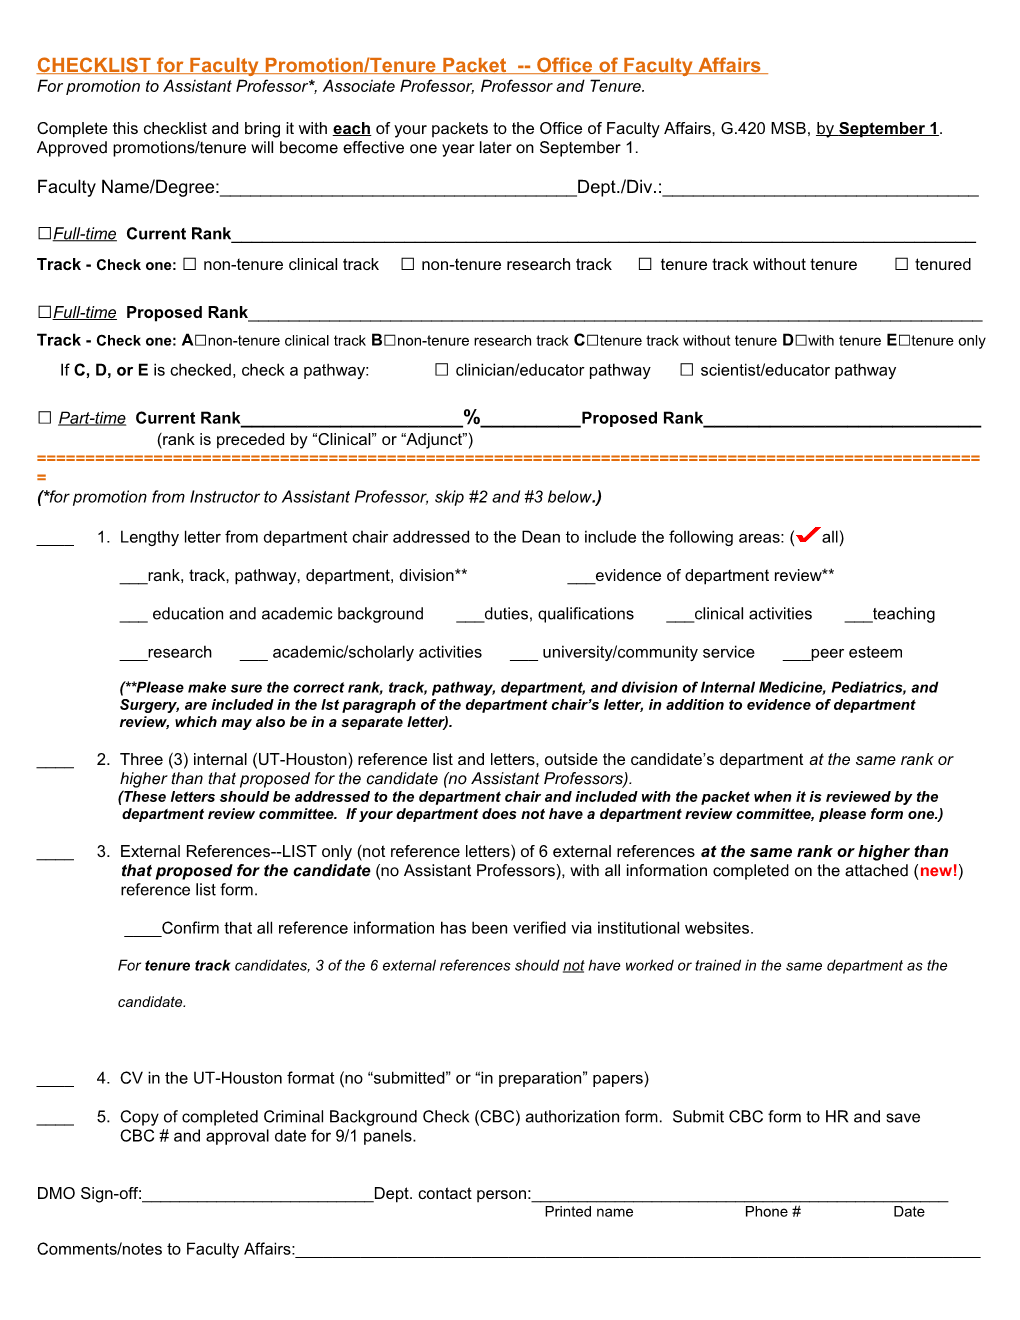 CHECKLIST for Faculty Promotion/Tenure Packet Office of Faculty Affairs